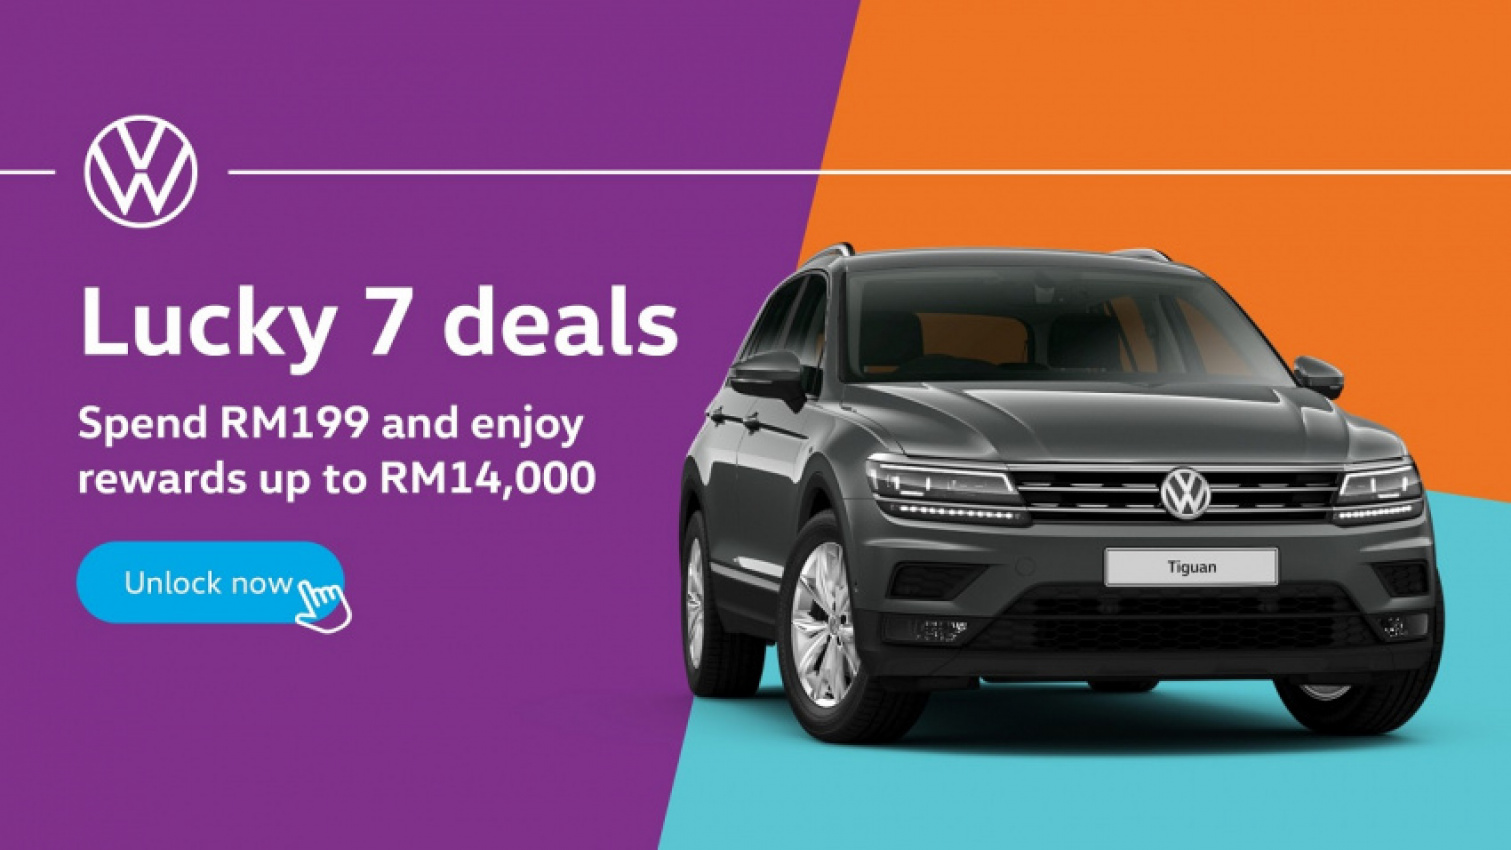 autos, car brands, cars, volkswagen, automotive, cars, malaysia, online store, promotions, sale, shopee, volkswagen passenger cars malaysia, special deals on volkswagen official store on shopee in time for 7.7 mid-year sale